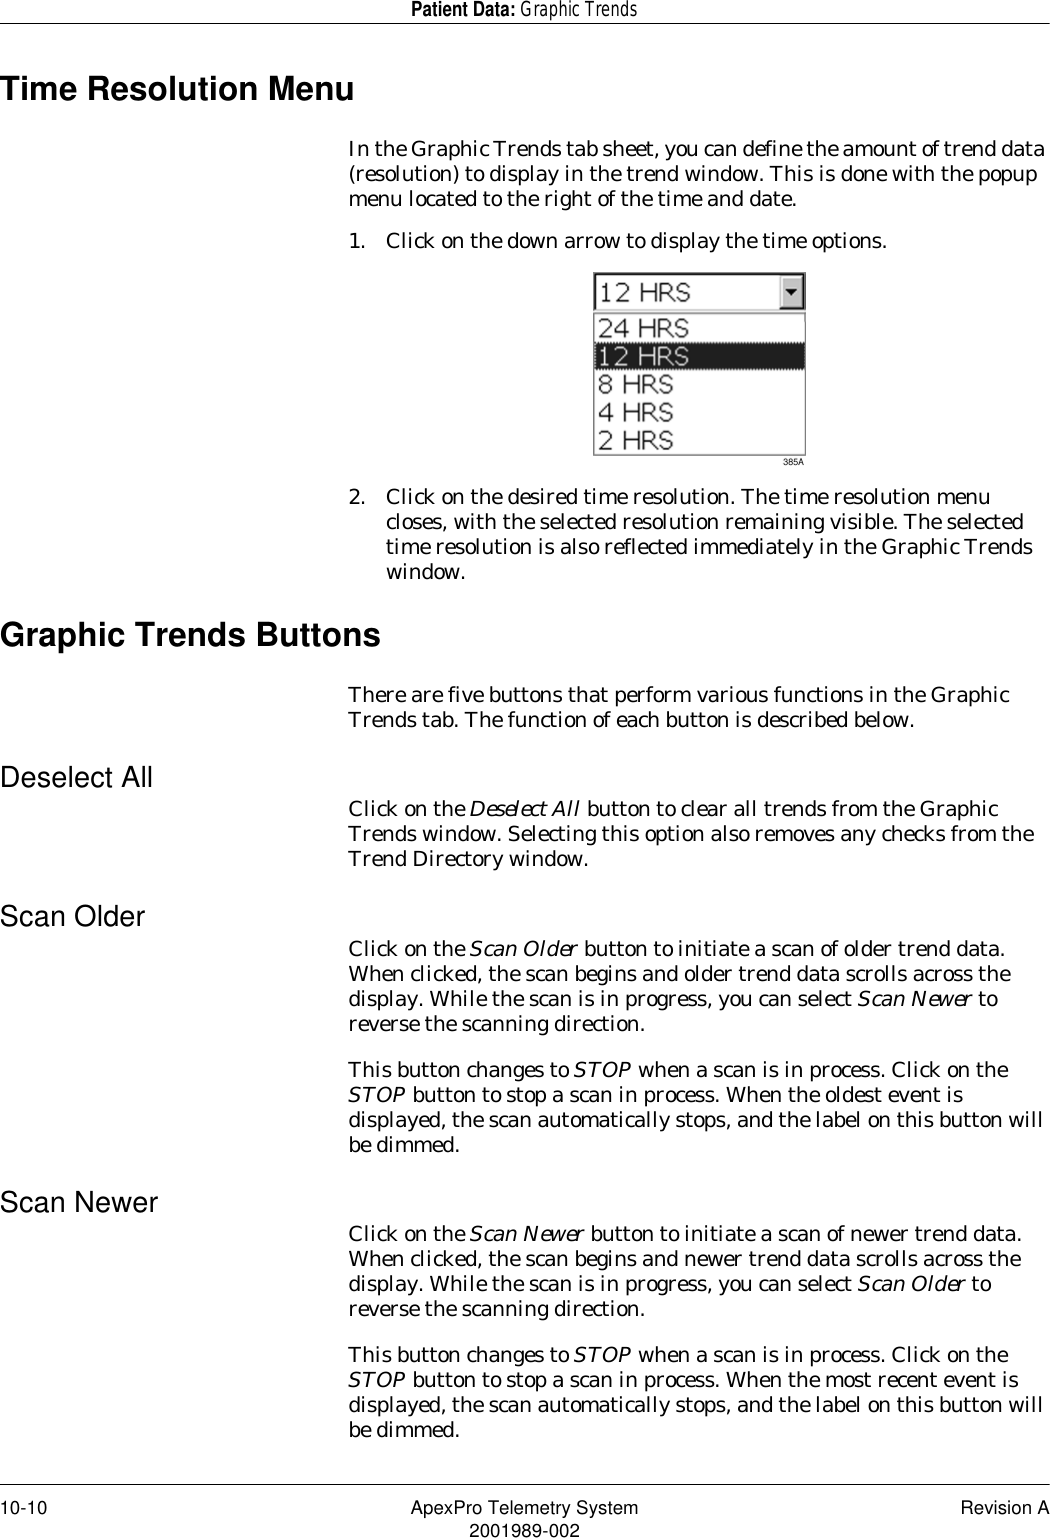 10-10 ApexPro Telemetry System Revision A2001989-002Patient Data: Graphic TrendsTime Resolution MenuIn the Graphic Trends tab sheet, you can define the amount of trend data (resolution) to display in the trend window. This is done with the popup menu located to the right of the time and date.1. Click on the down arrow to display the time options.2. Click on the desired time resolution. The time resolution menu closes, with the selected resolution remaining visible. The selected time resolution is also reflected immediately in the Graphic Trends window.Graphic Trends ButtonsThere are five buttons that perform various functions in the Graphic Trends tab. The function of each button is described below.Deselect All Click on the Deselect All button to clear all trends from the Graphic Trends window. Selecting this option also removes any checks from the Trend Directory window.Scan Older Click on the Scan Older button to initiate a scan of older trend data. When clicked, the scan begins and older trend data scrolls across the display. While the scan is in progress, you can select Scan Newer to reverse the scanning direction.This button changes to STOP when a scan is in process. Click on the STOP button to stop a scan in process. When the oldest event is displayed, the scan automatically stops, and the label on this button will be dimmed.Scan Newer Click on the Scan Newer button to initiate a scan of newer trend data. When clicked, the scan begins and newer trend data scrolls across the display. While the scan is in progress, you can select Scan Older to reverse the scanning direction.This button changes to STOP when a scan is in process. Click on the STOP button to stop a scan in process. When the most recent event is displayed, the scan automatically stops, and the label on this button will be dimmed.